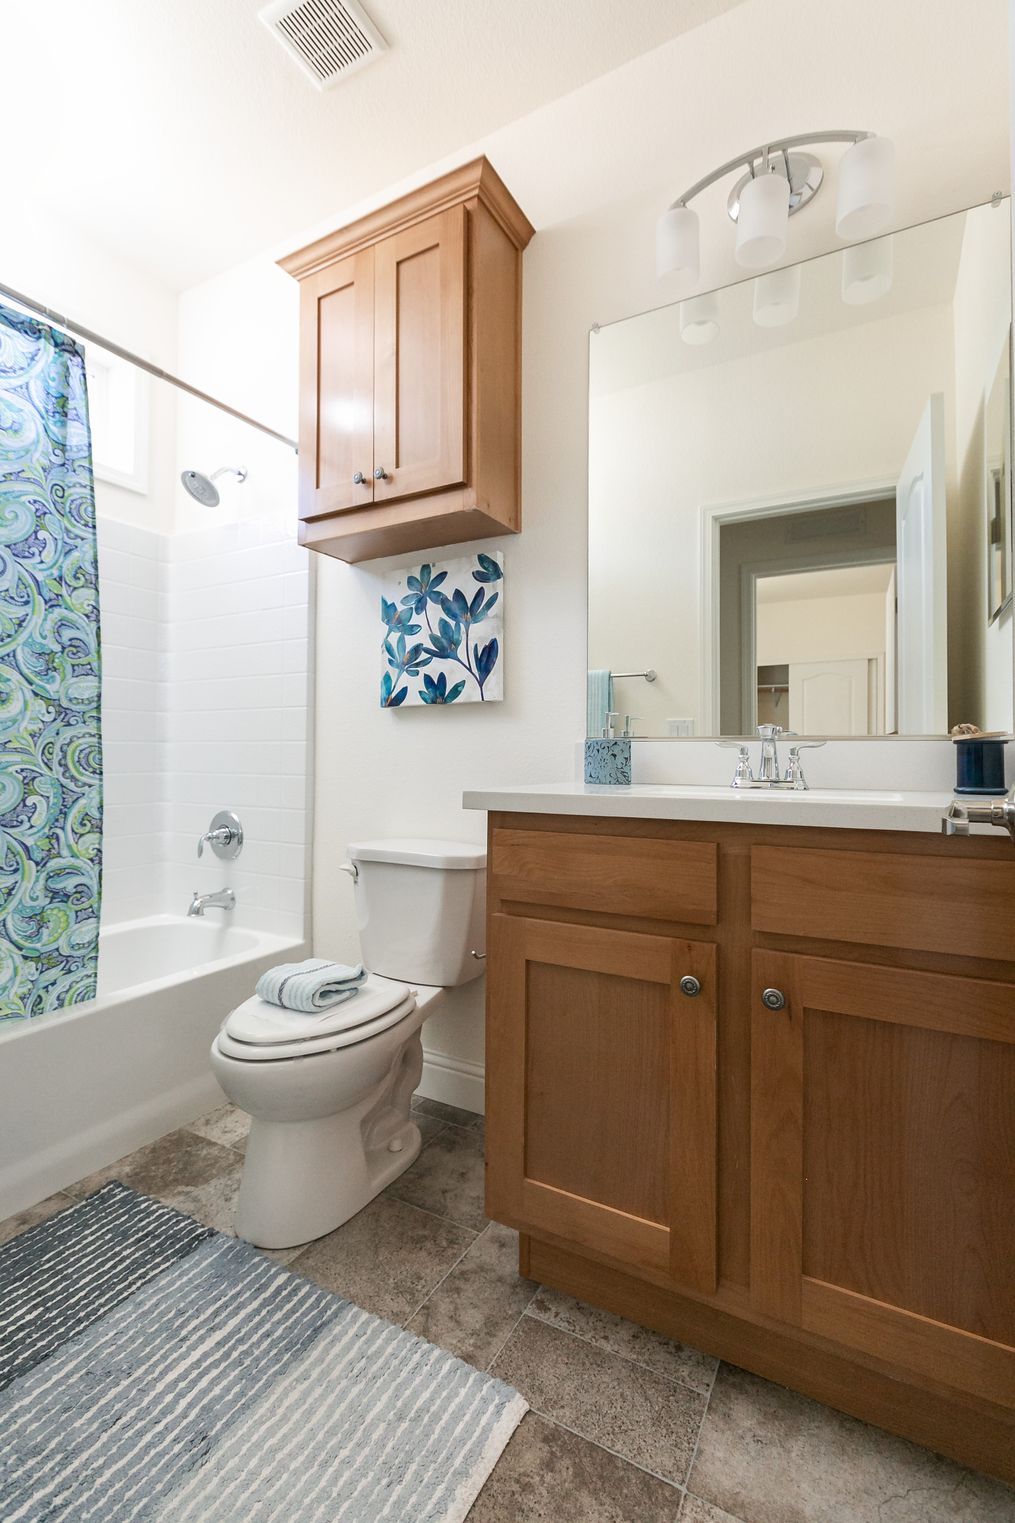 The MORRO BAY 20563-A Guest Bathroom. This Manufactured Mobile Home features 3 bedrooms and 2 baths.